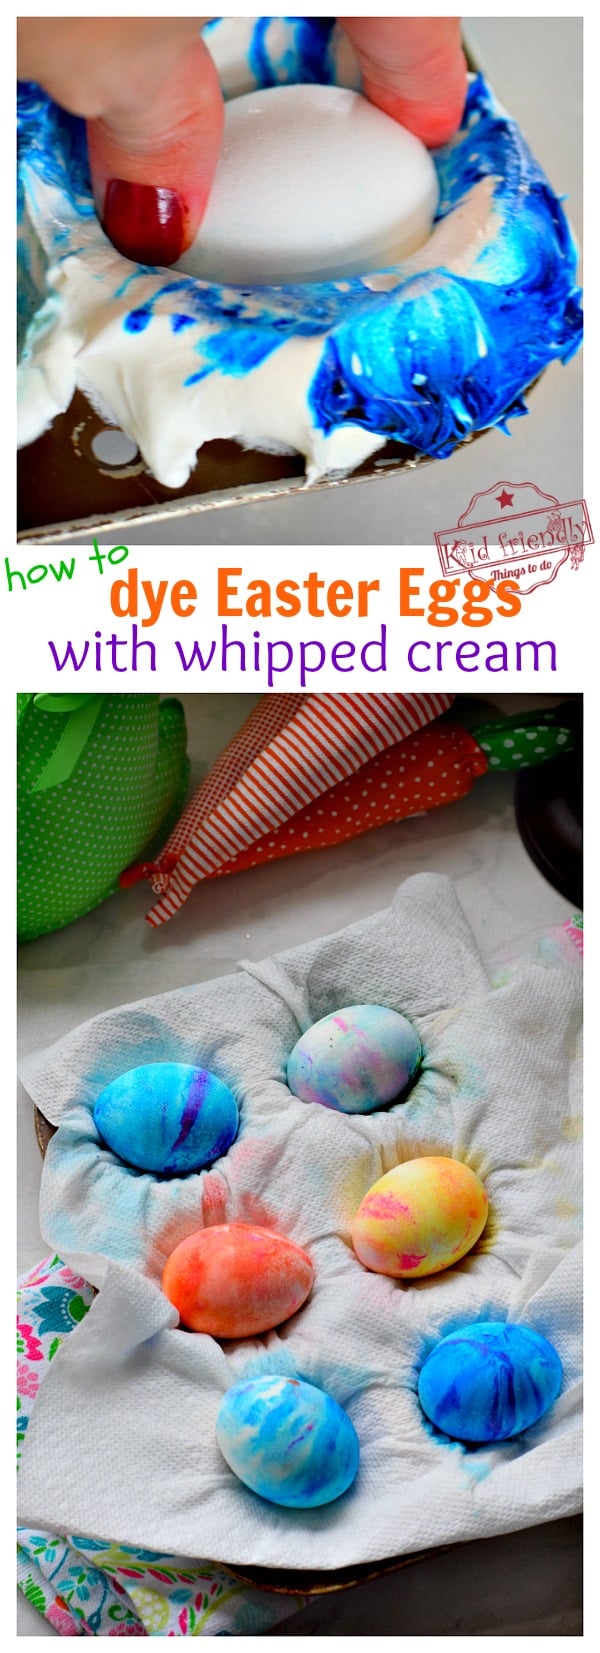 how to dye Easter eggs with whipped cream